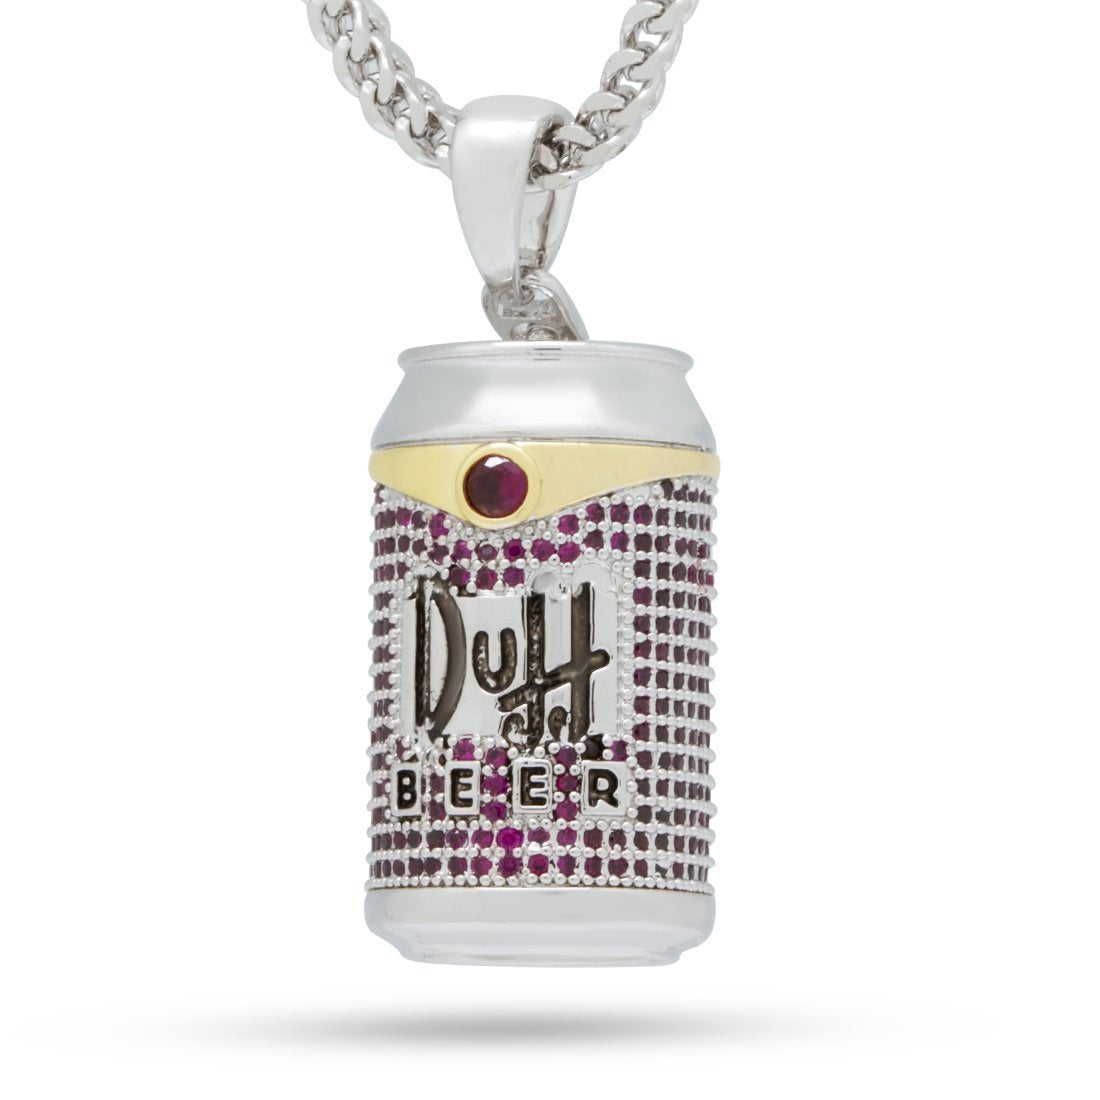 BEER CAN NECKLACE, gold